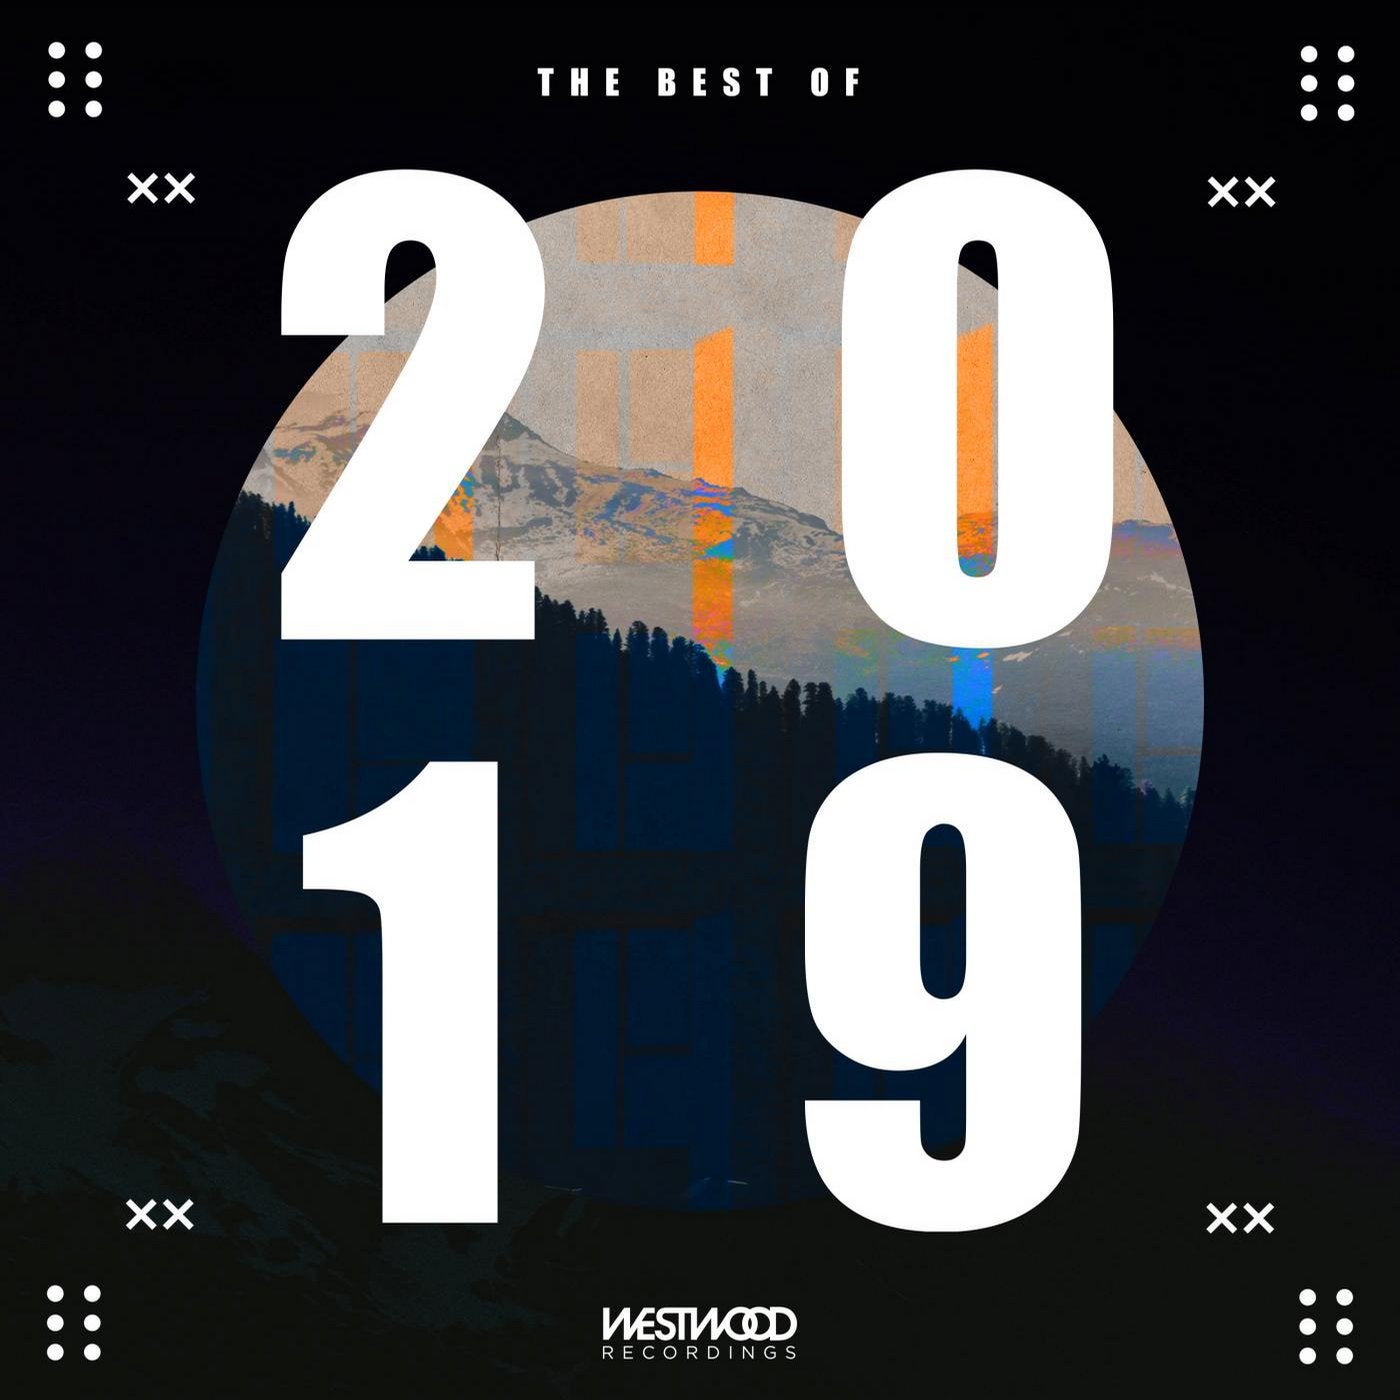 The Best of Westwood Recordings 2019